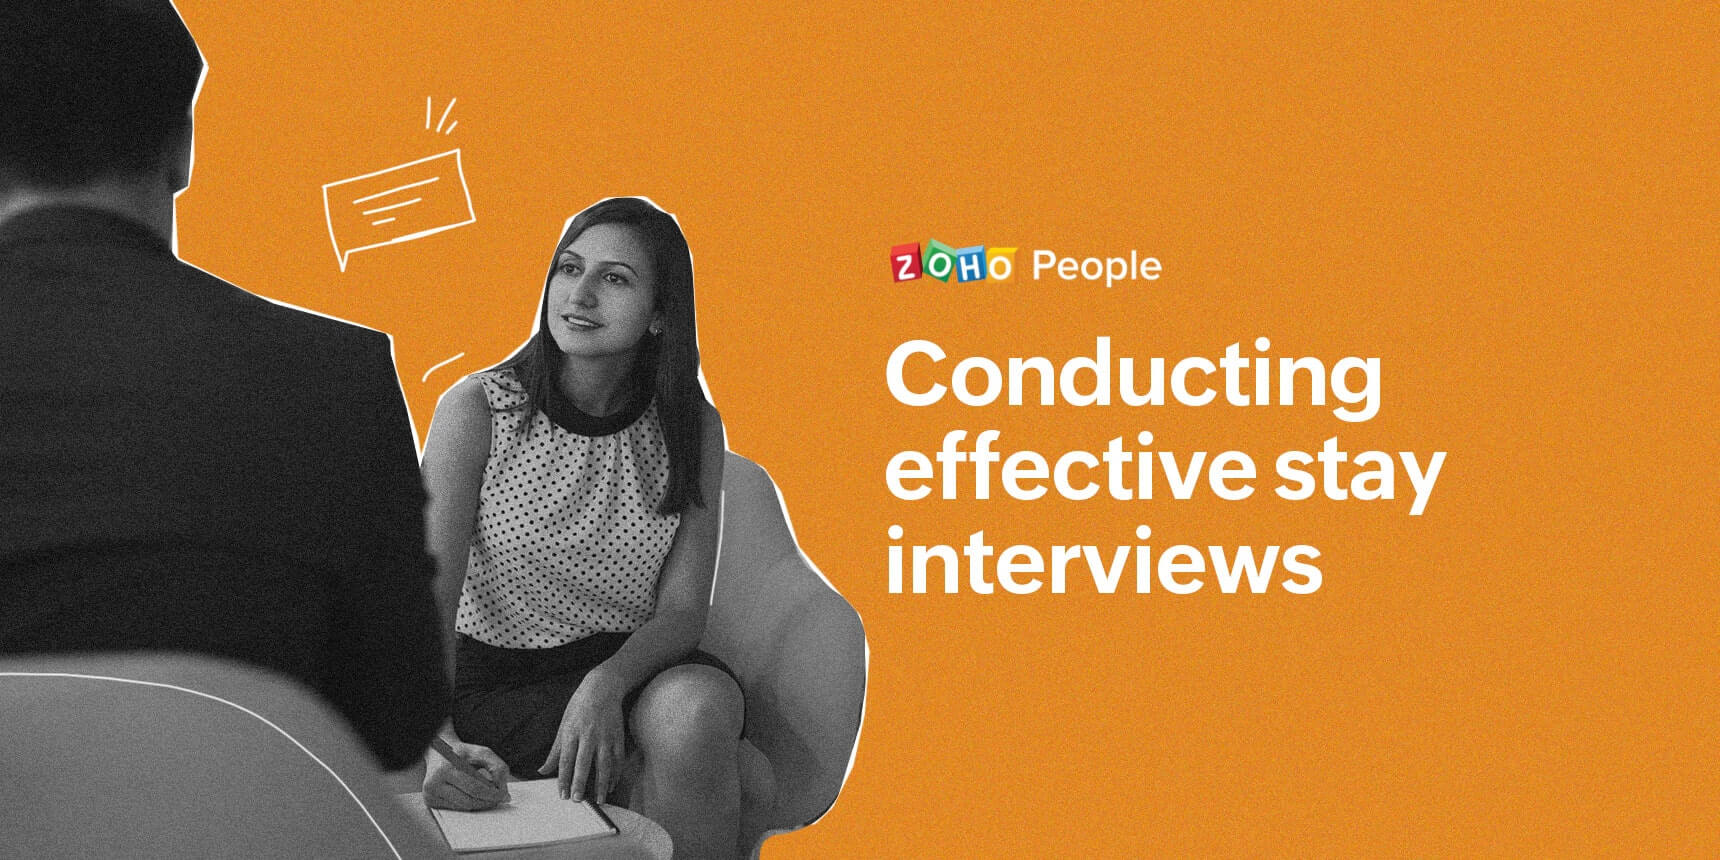 Tips to conduct stay interviews